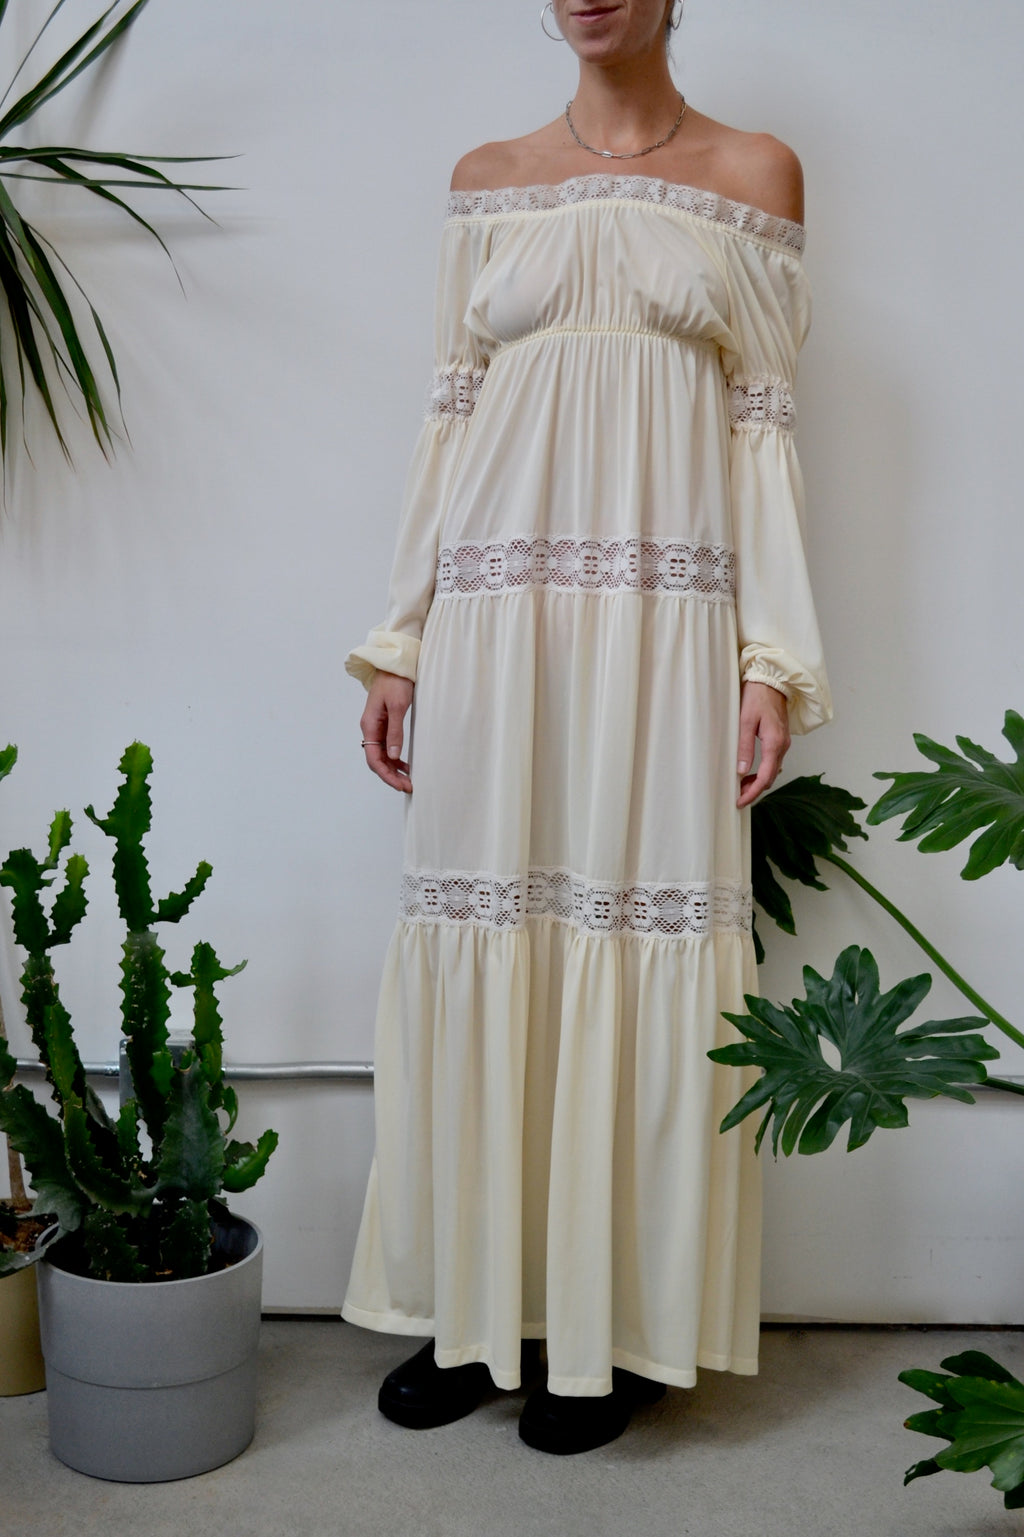 Stretchy Lace Peasant Dress